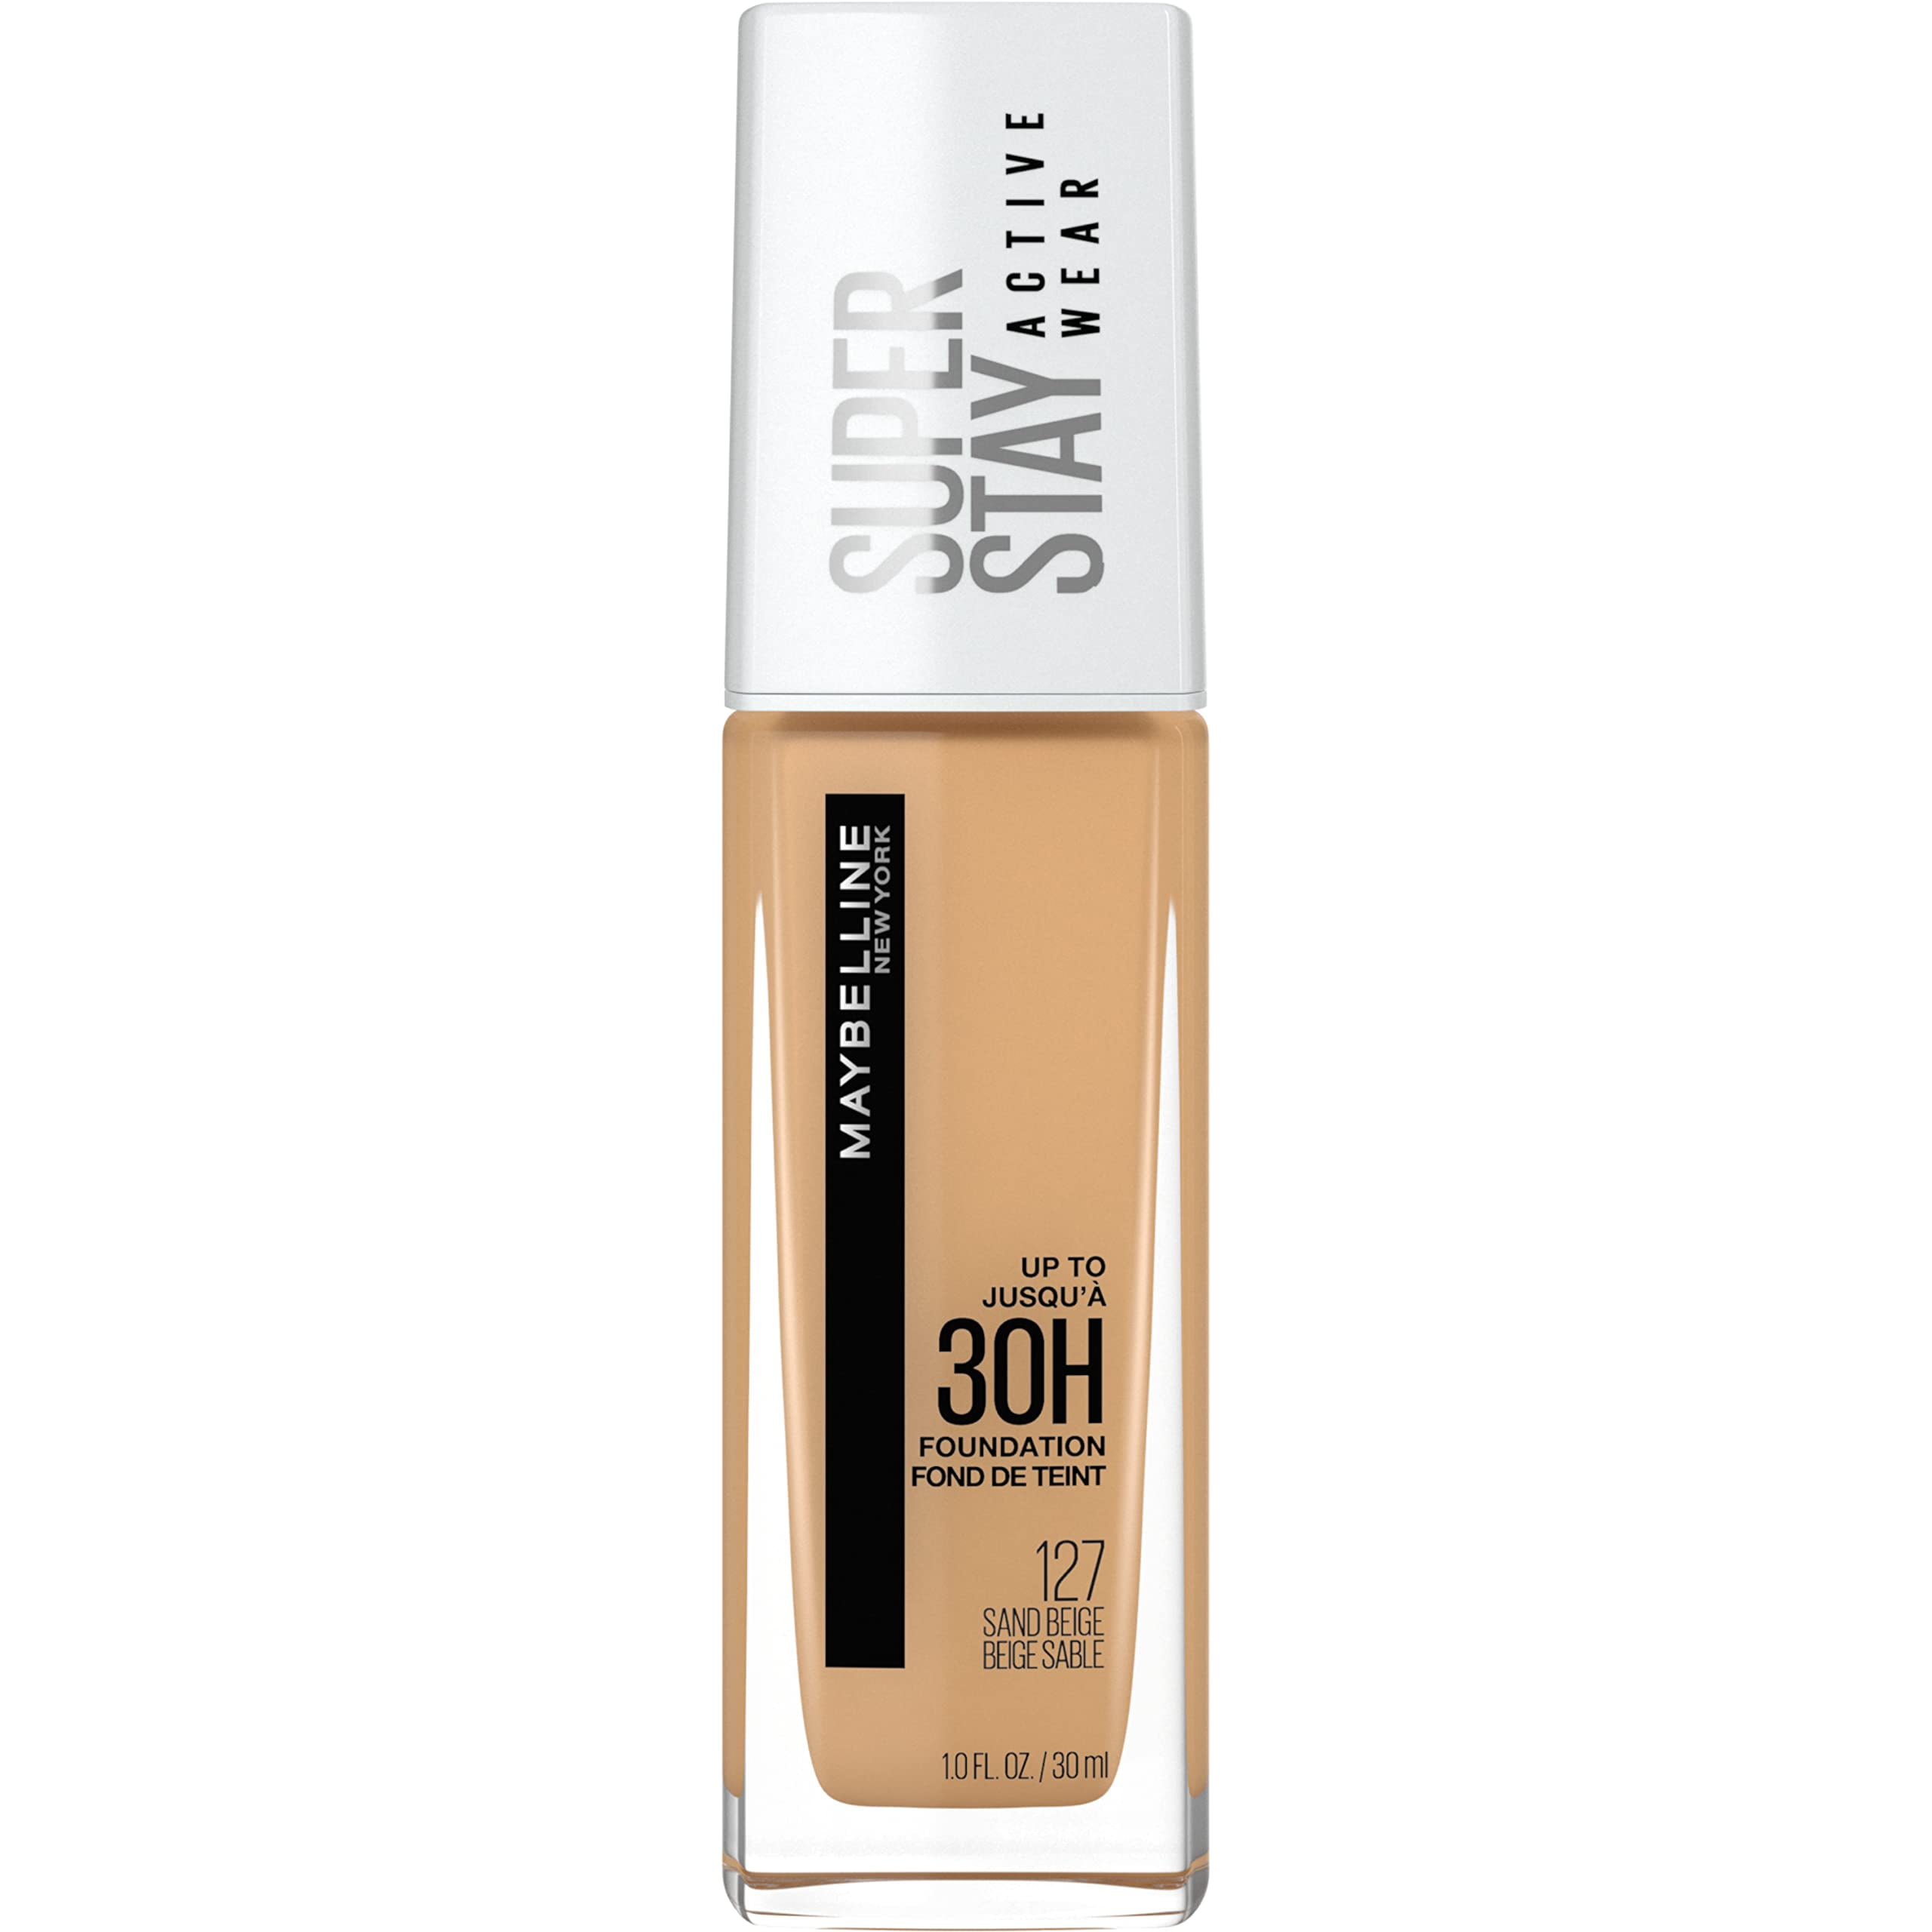 Maybelline Super Stay Full Coverage Liquid Foundation - Activewear Makeup,  Stay Gorgeous for up to 30 Hours! Waterproof, Sweatproof &  Transfer-Resistant – Matte Finish in Sand Beige – 1 Count